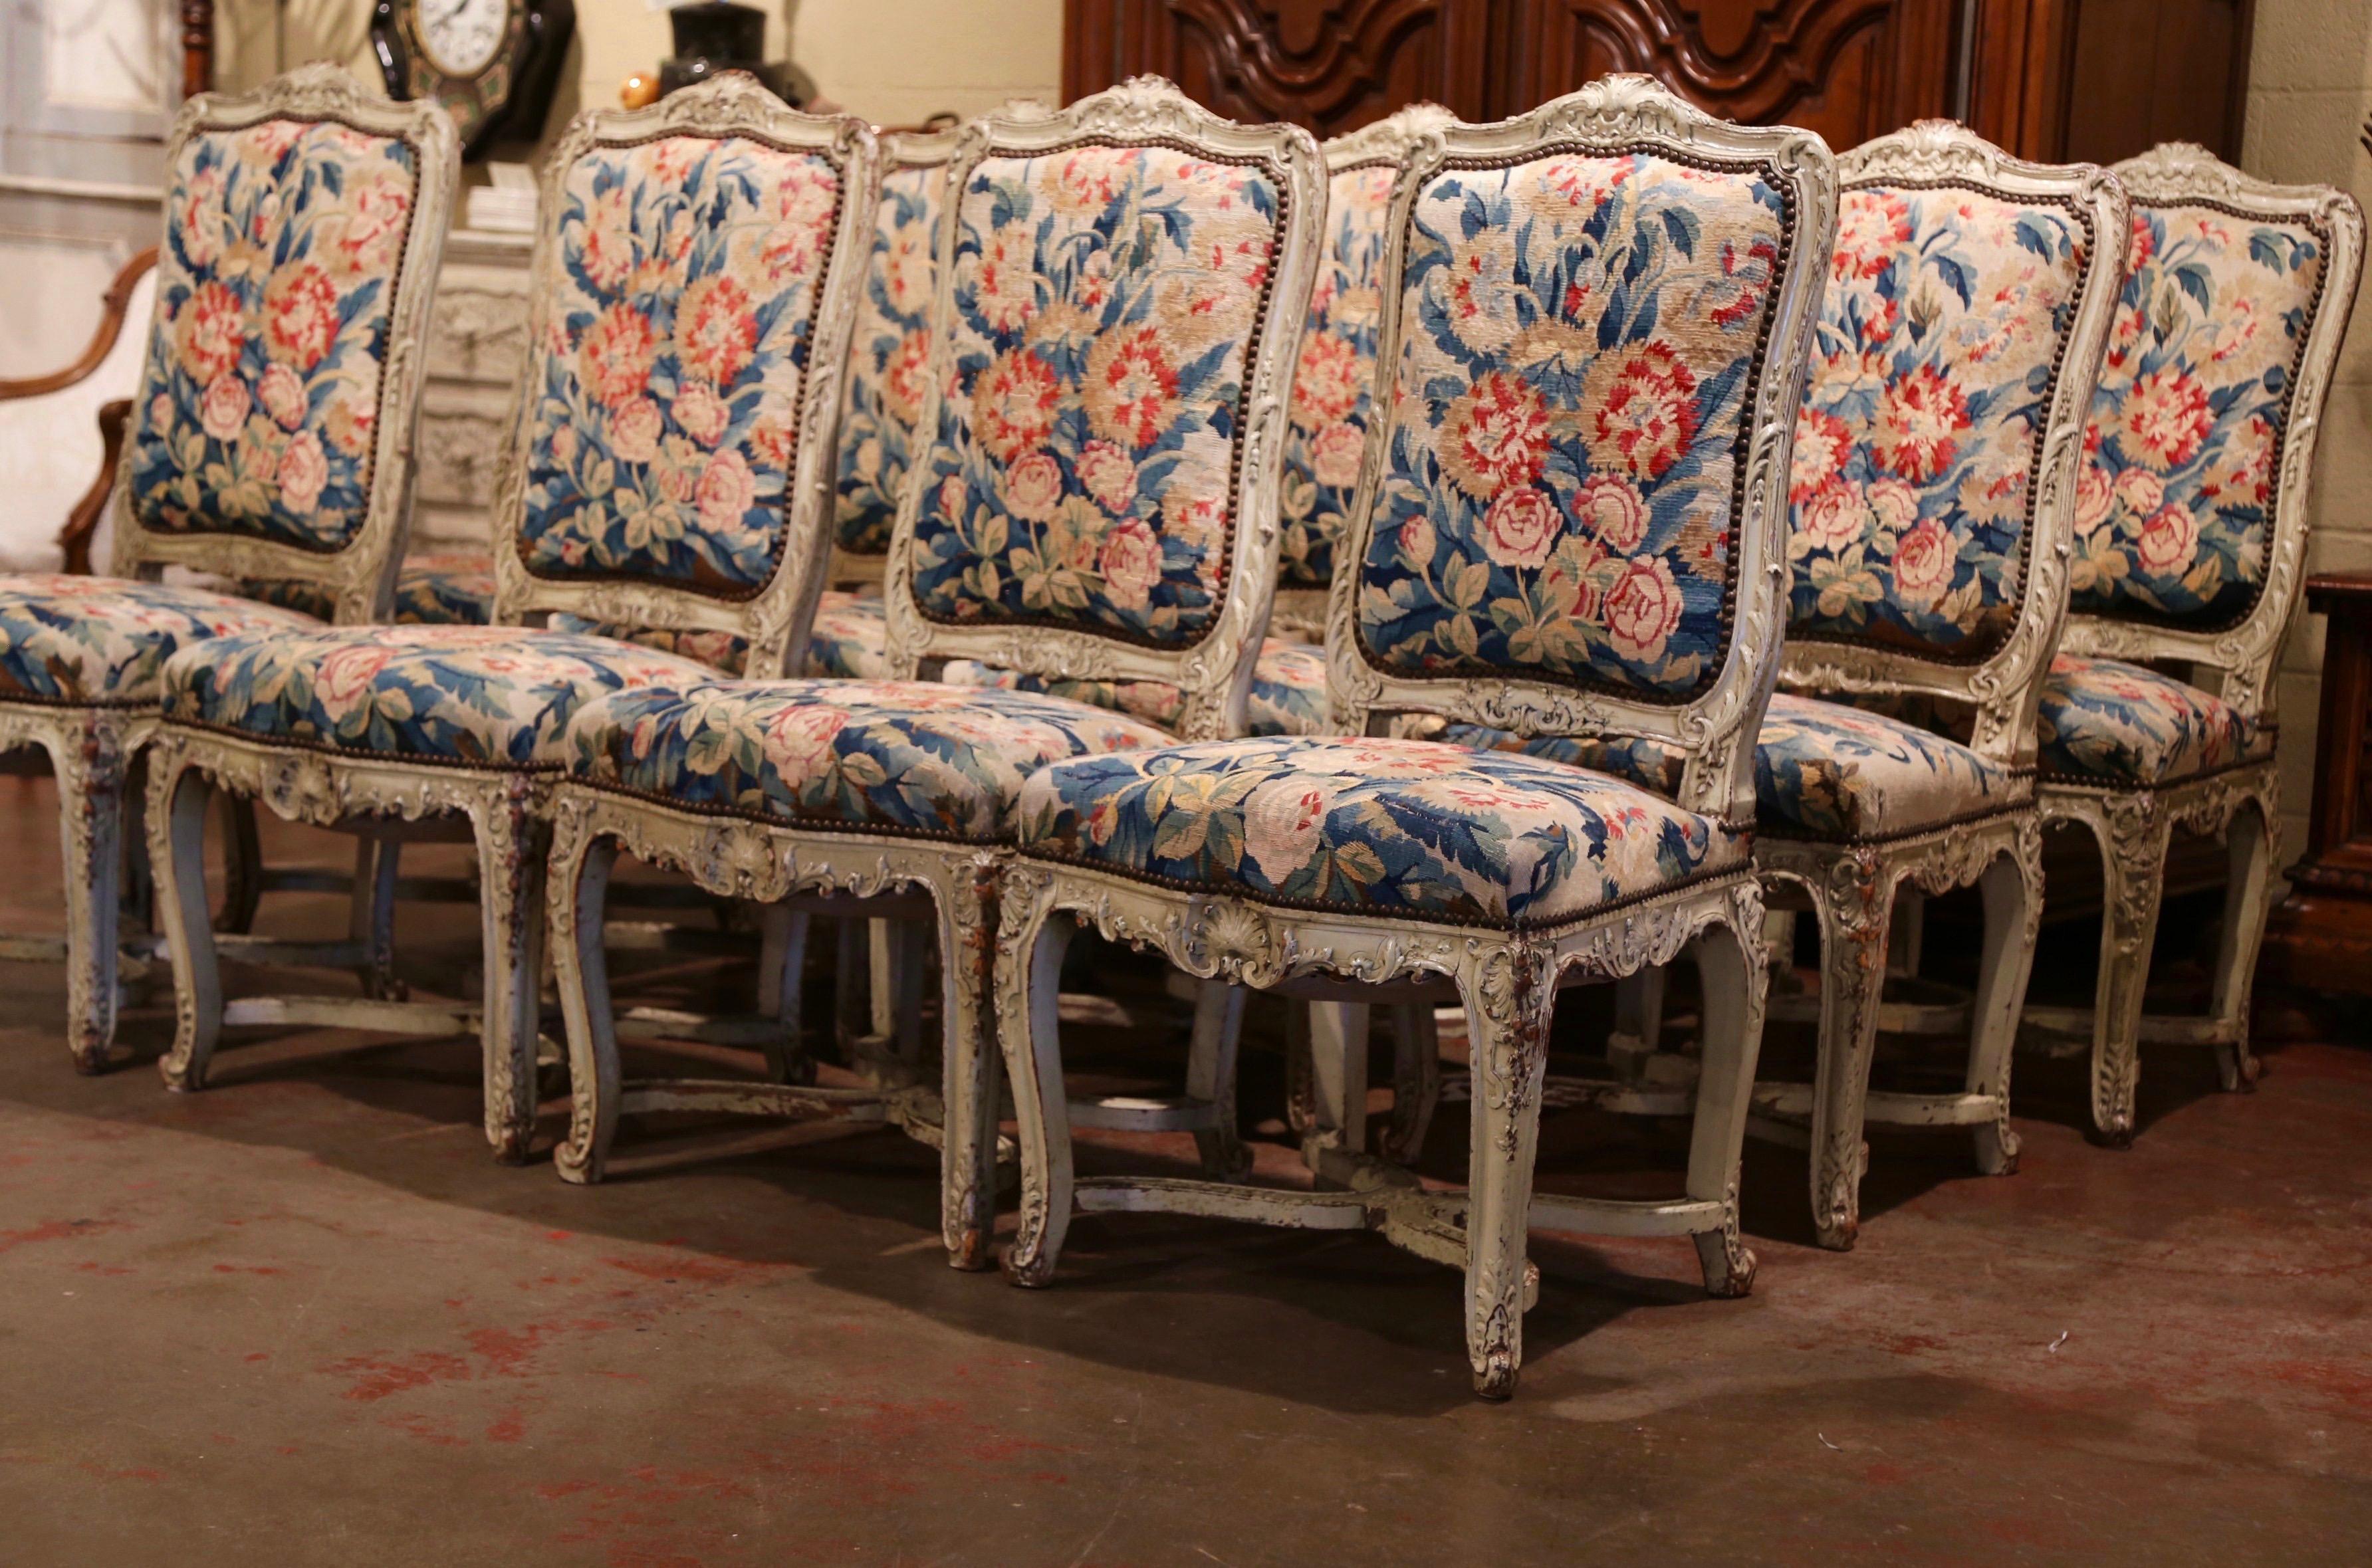 Louis XV 19th Century Carved Painted Dining Room Chairs with Aubusson Tapestry -Set of 12